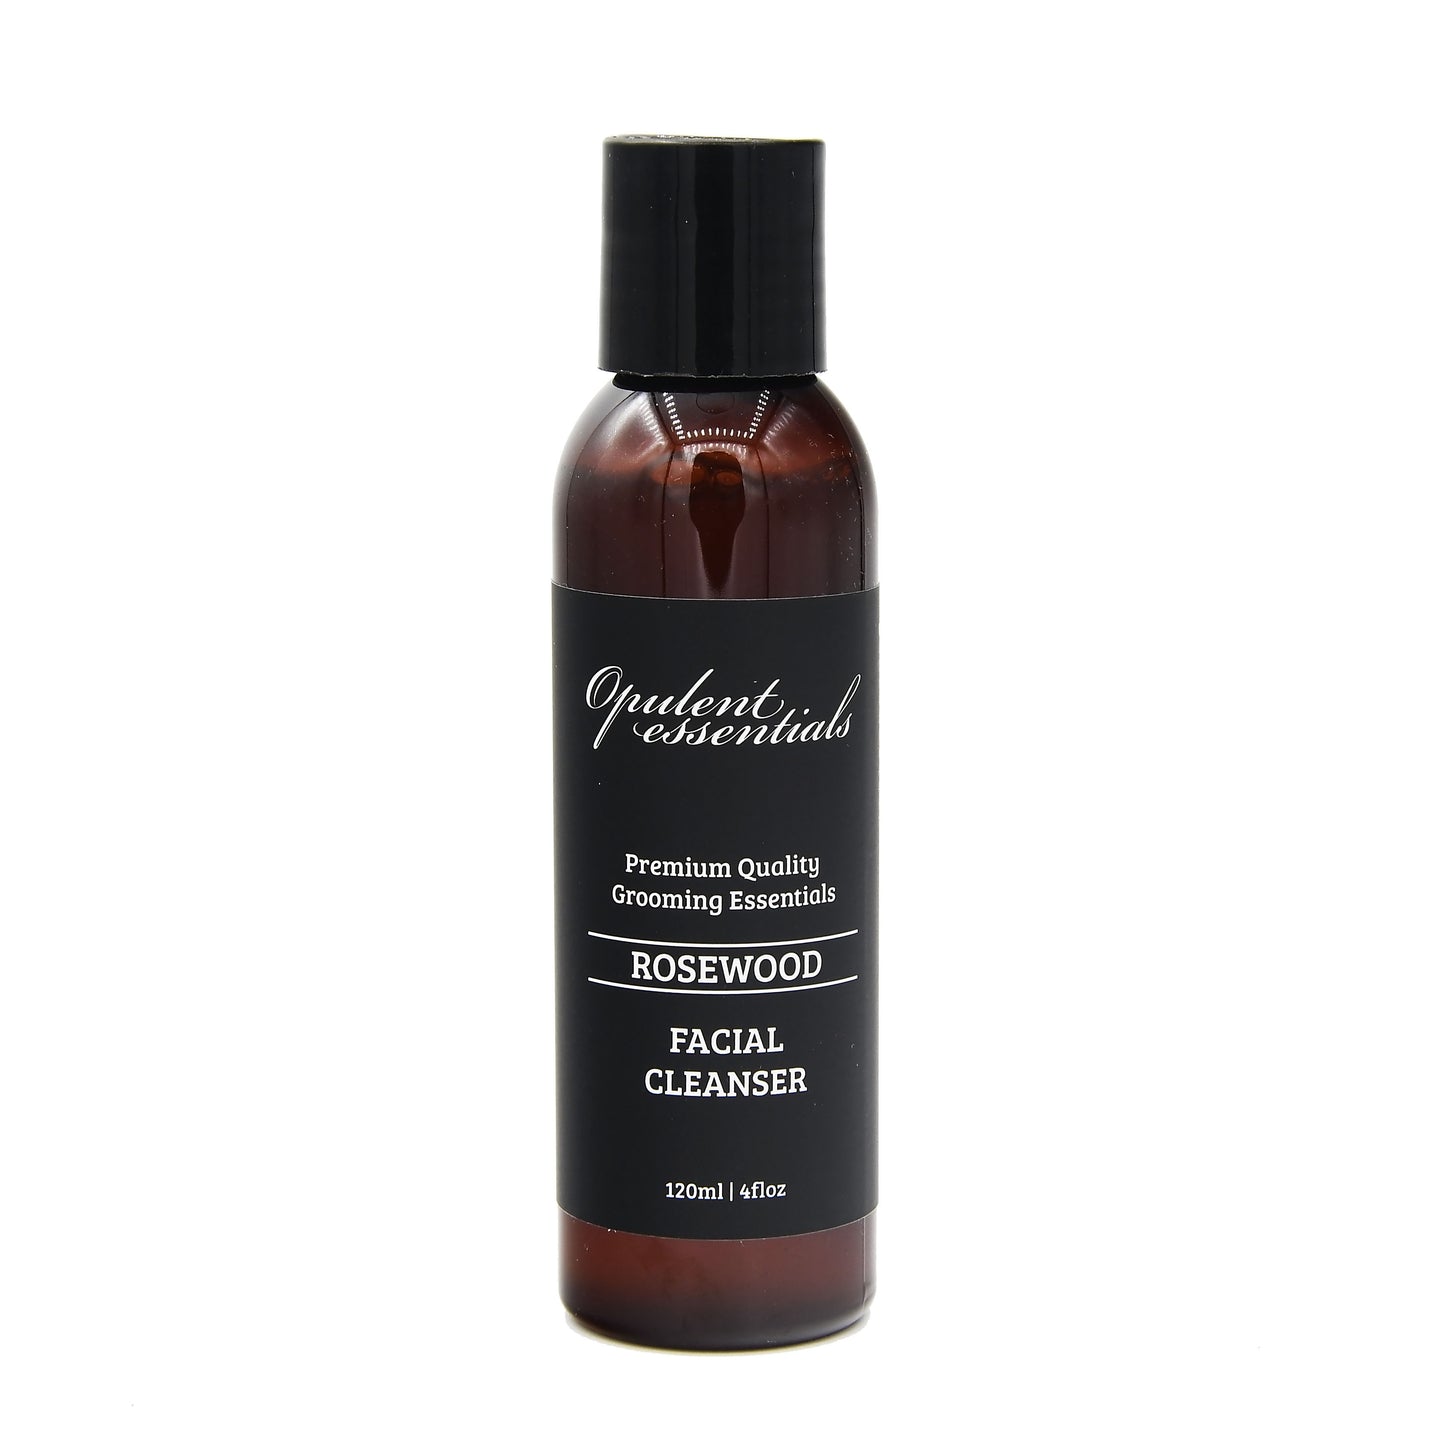 Facial Cleanser - Rosewood